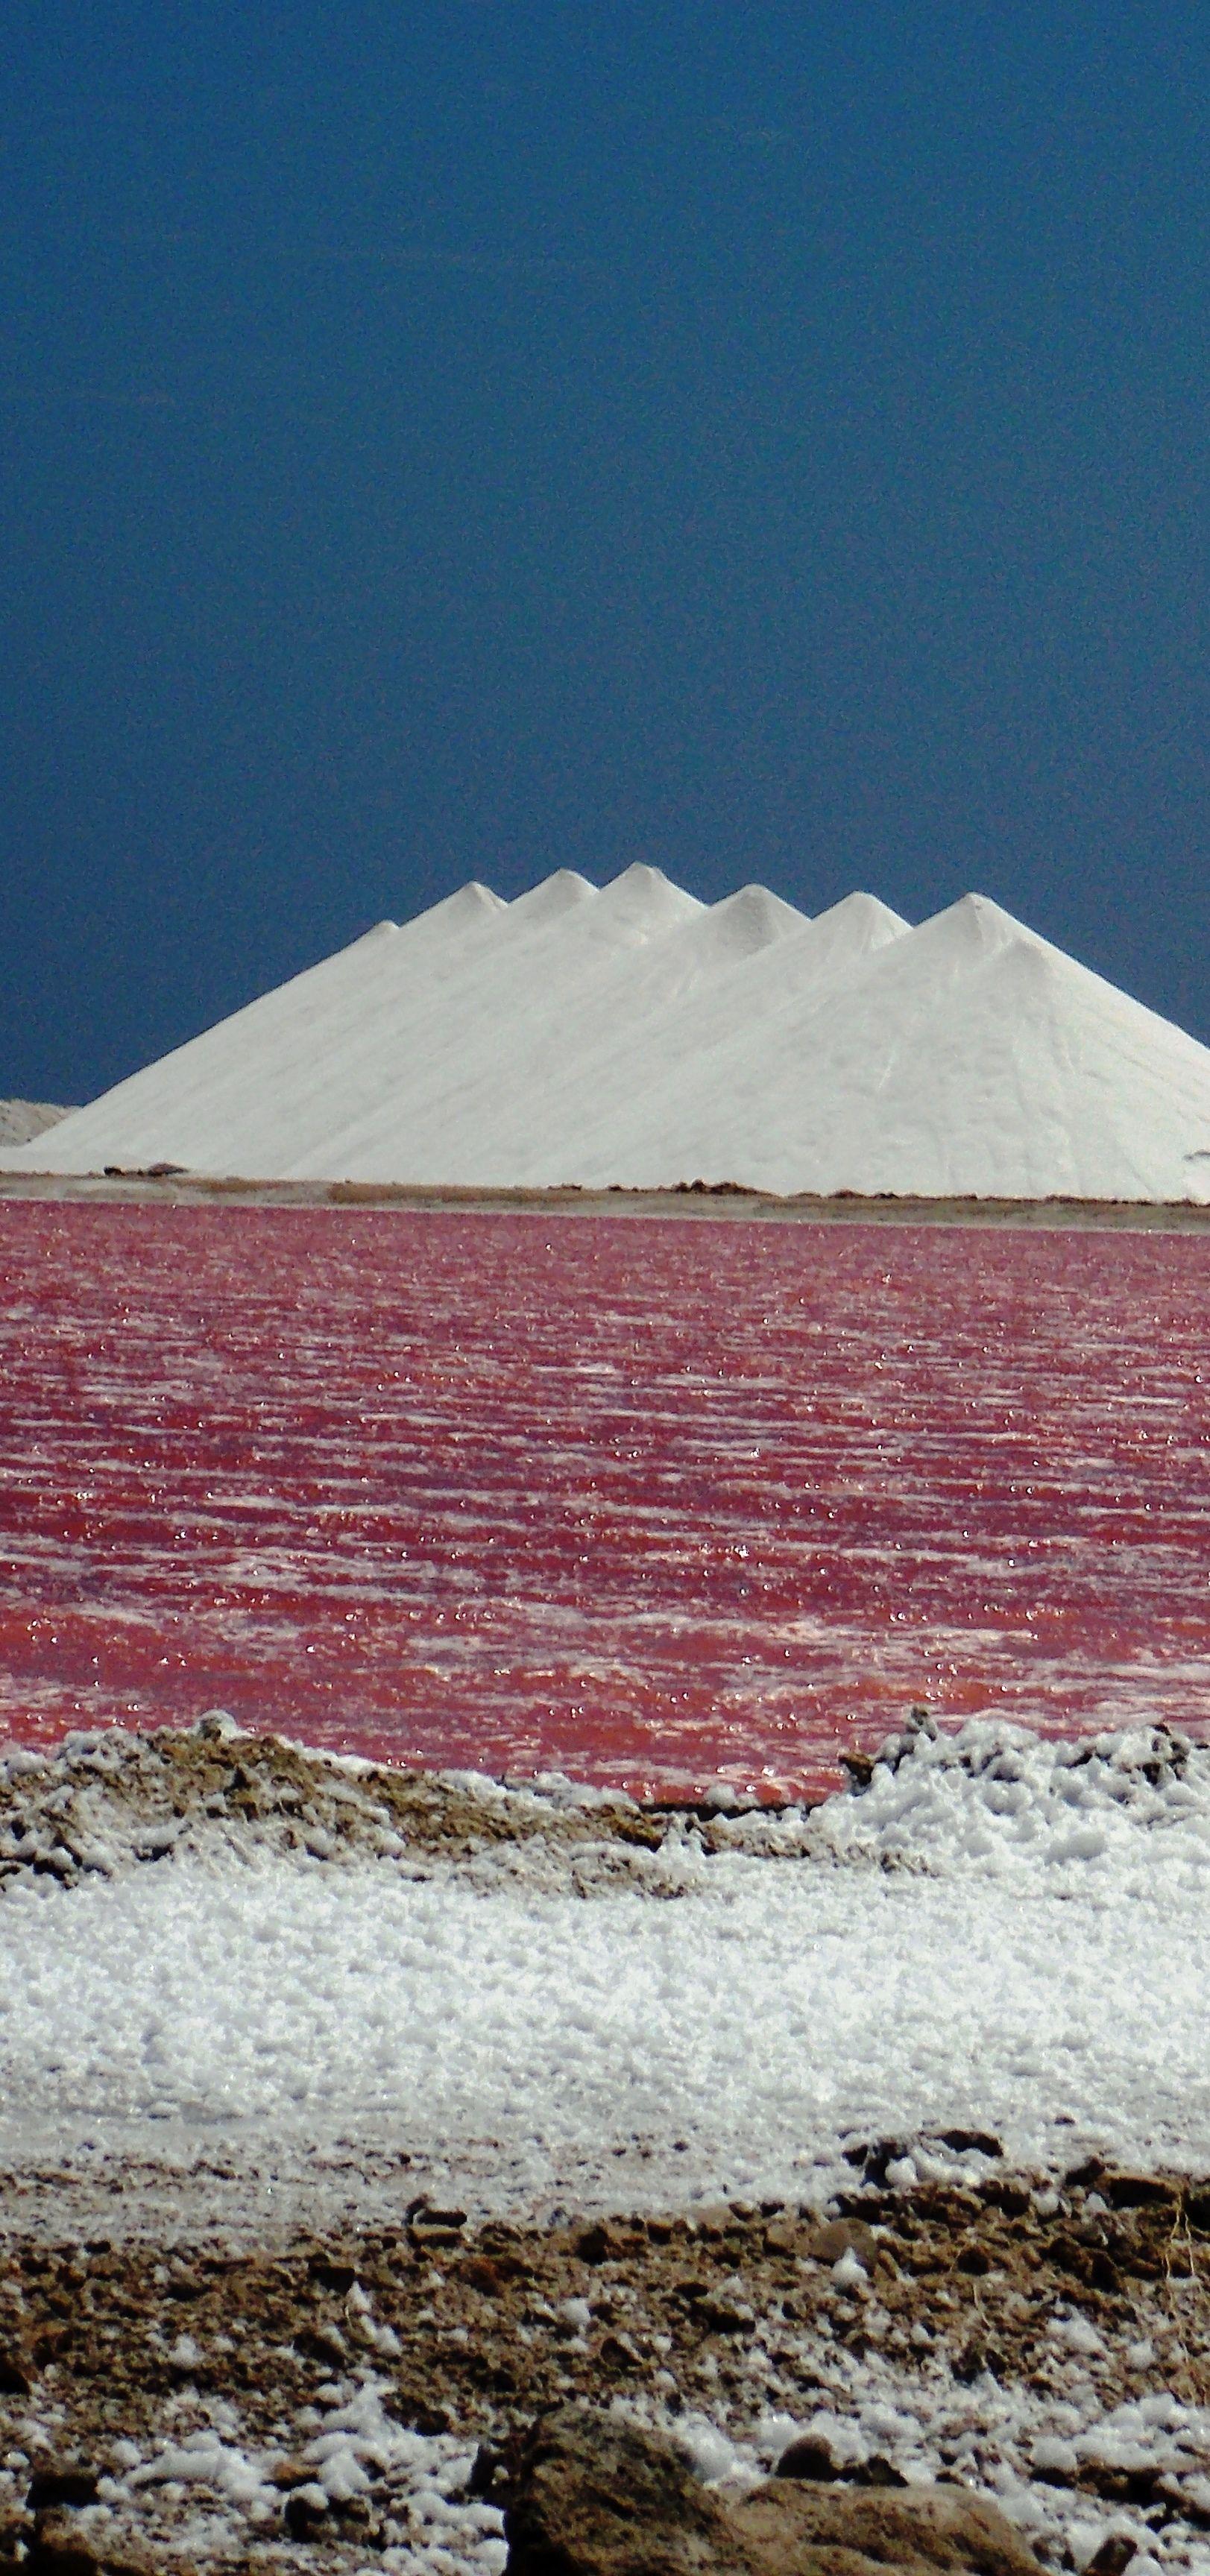 Pink Water with Mountains Logo - Pink water of the Bonaire salt pans and mountains of salt in